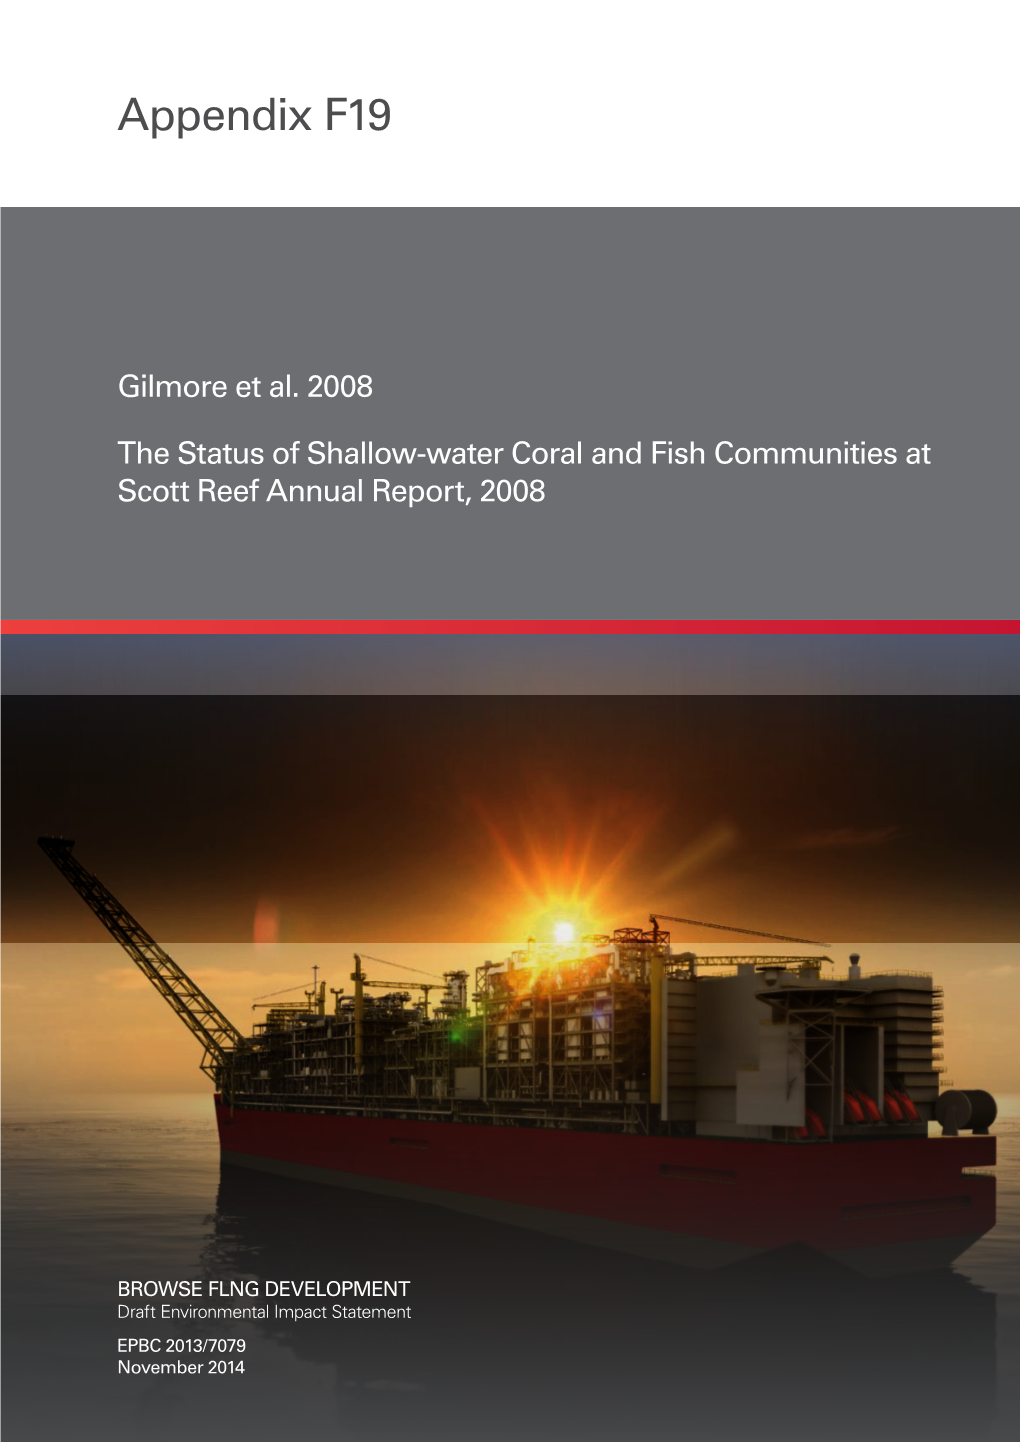 The Status of Shallow-Water Coral and Fish Communities at Scott Reef Annual Report, 2008